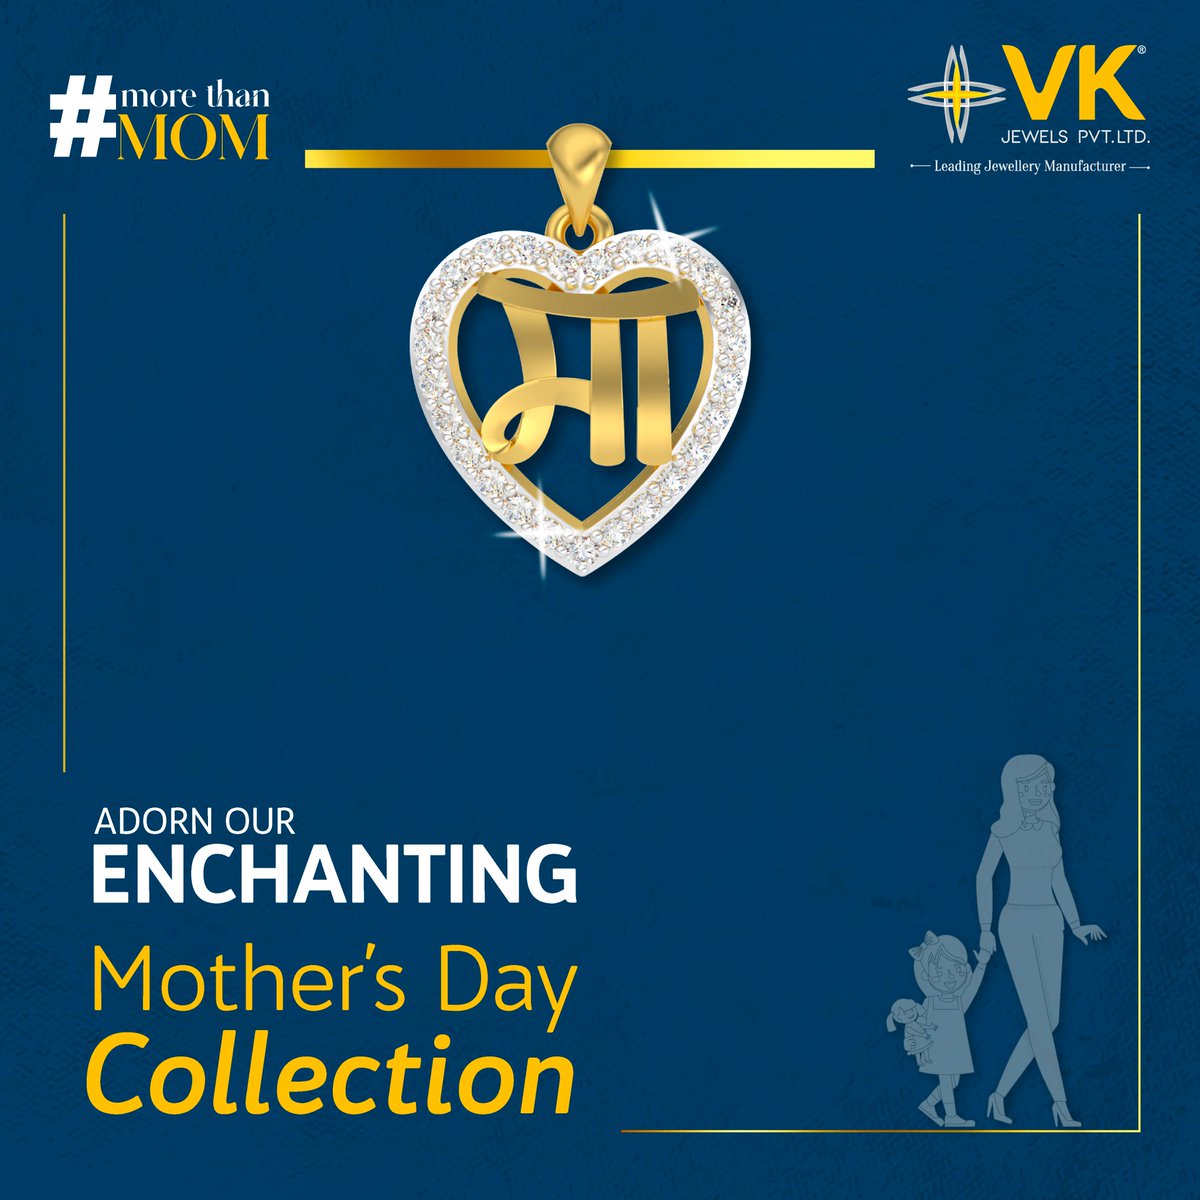 From wiping away tears to giving the best advice, Mom is truly the superhero. Let’s appreciate her unwavering love and strength.

Download the VK App now! 

Click the link: onelink.to/rht69t

Call us on+91-9081703200

#MorethanMOM #Momslove #Momsday #mothersday